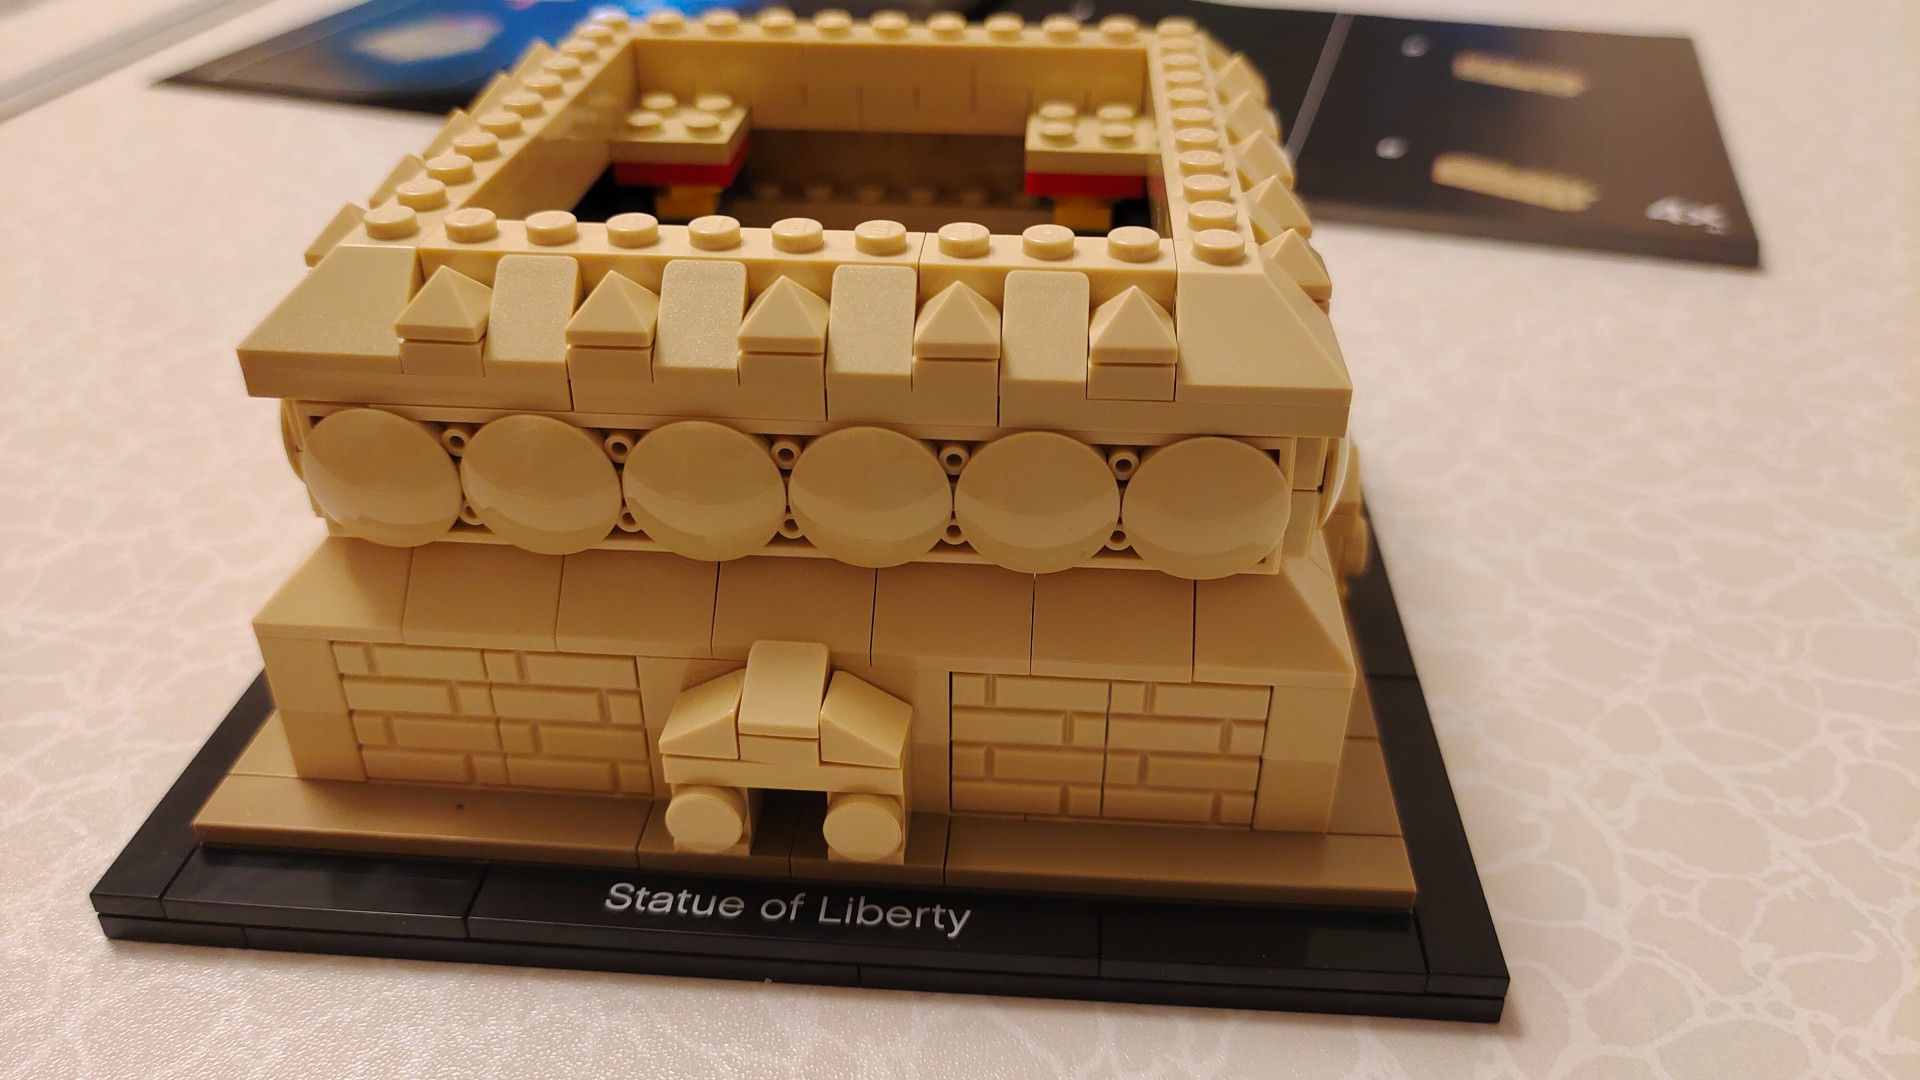 Lego Architecture Statue of Liberty 21042 - close up of the plinth during the start of construction.